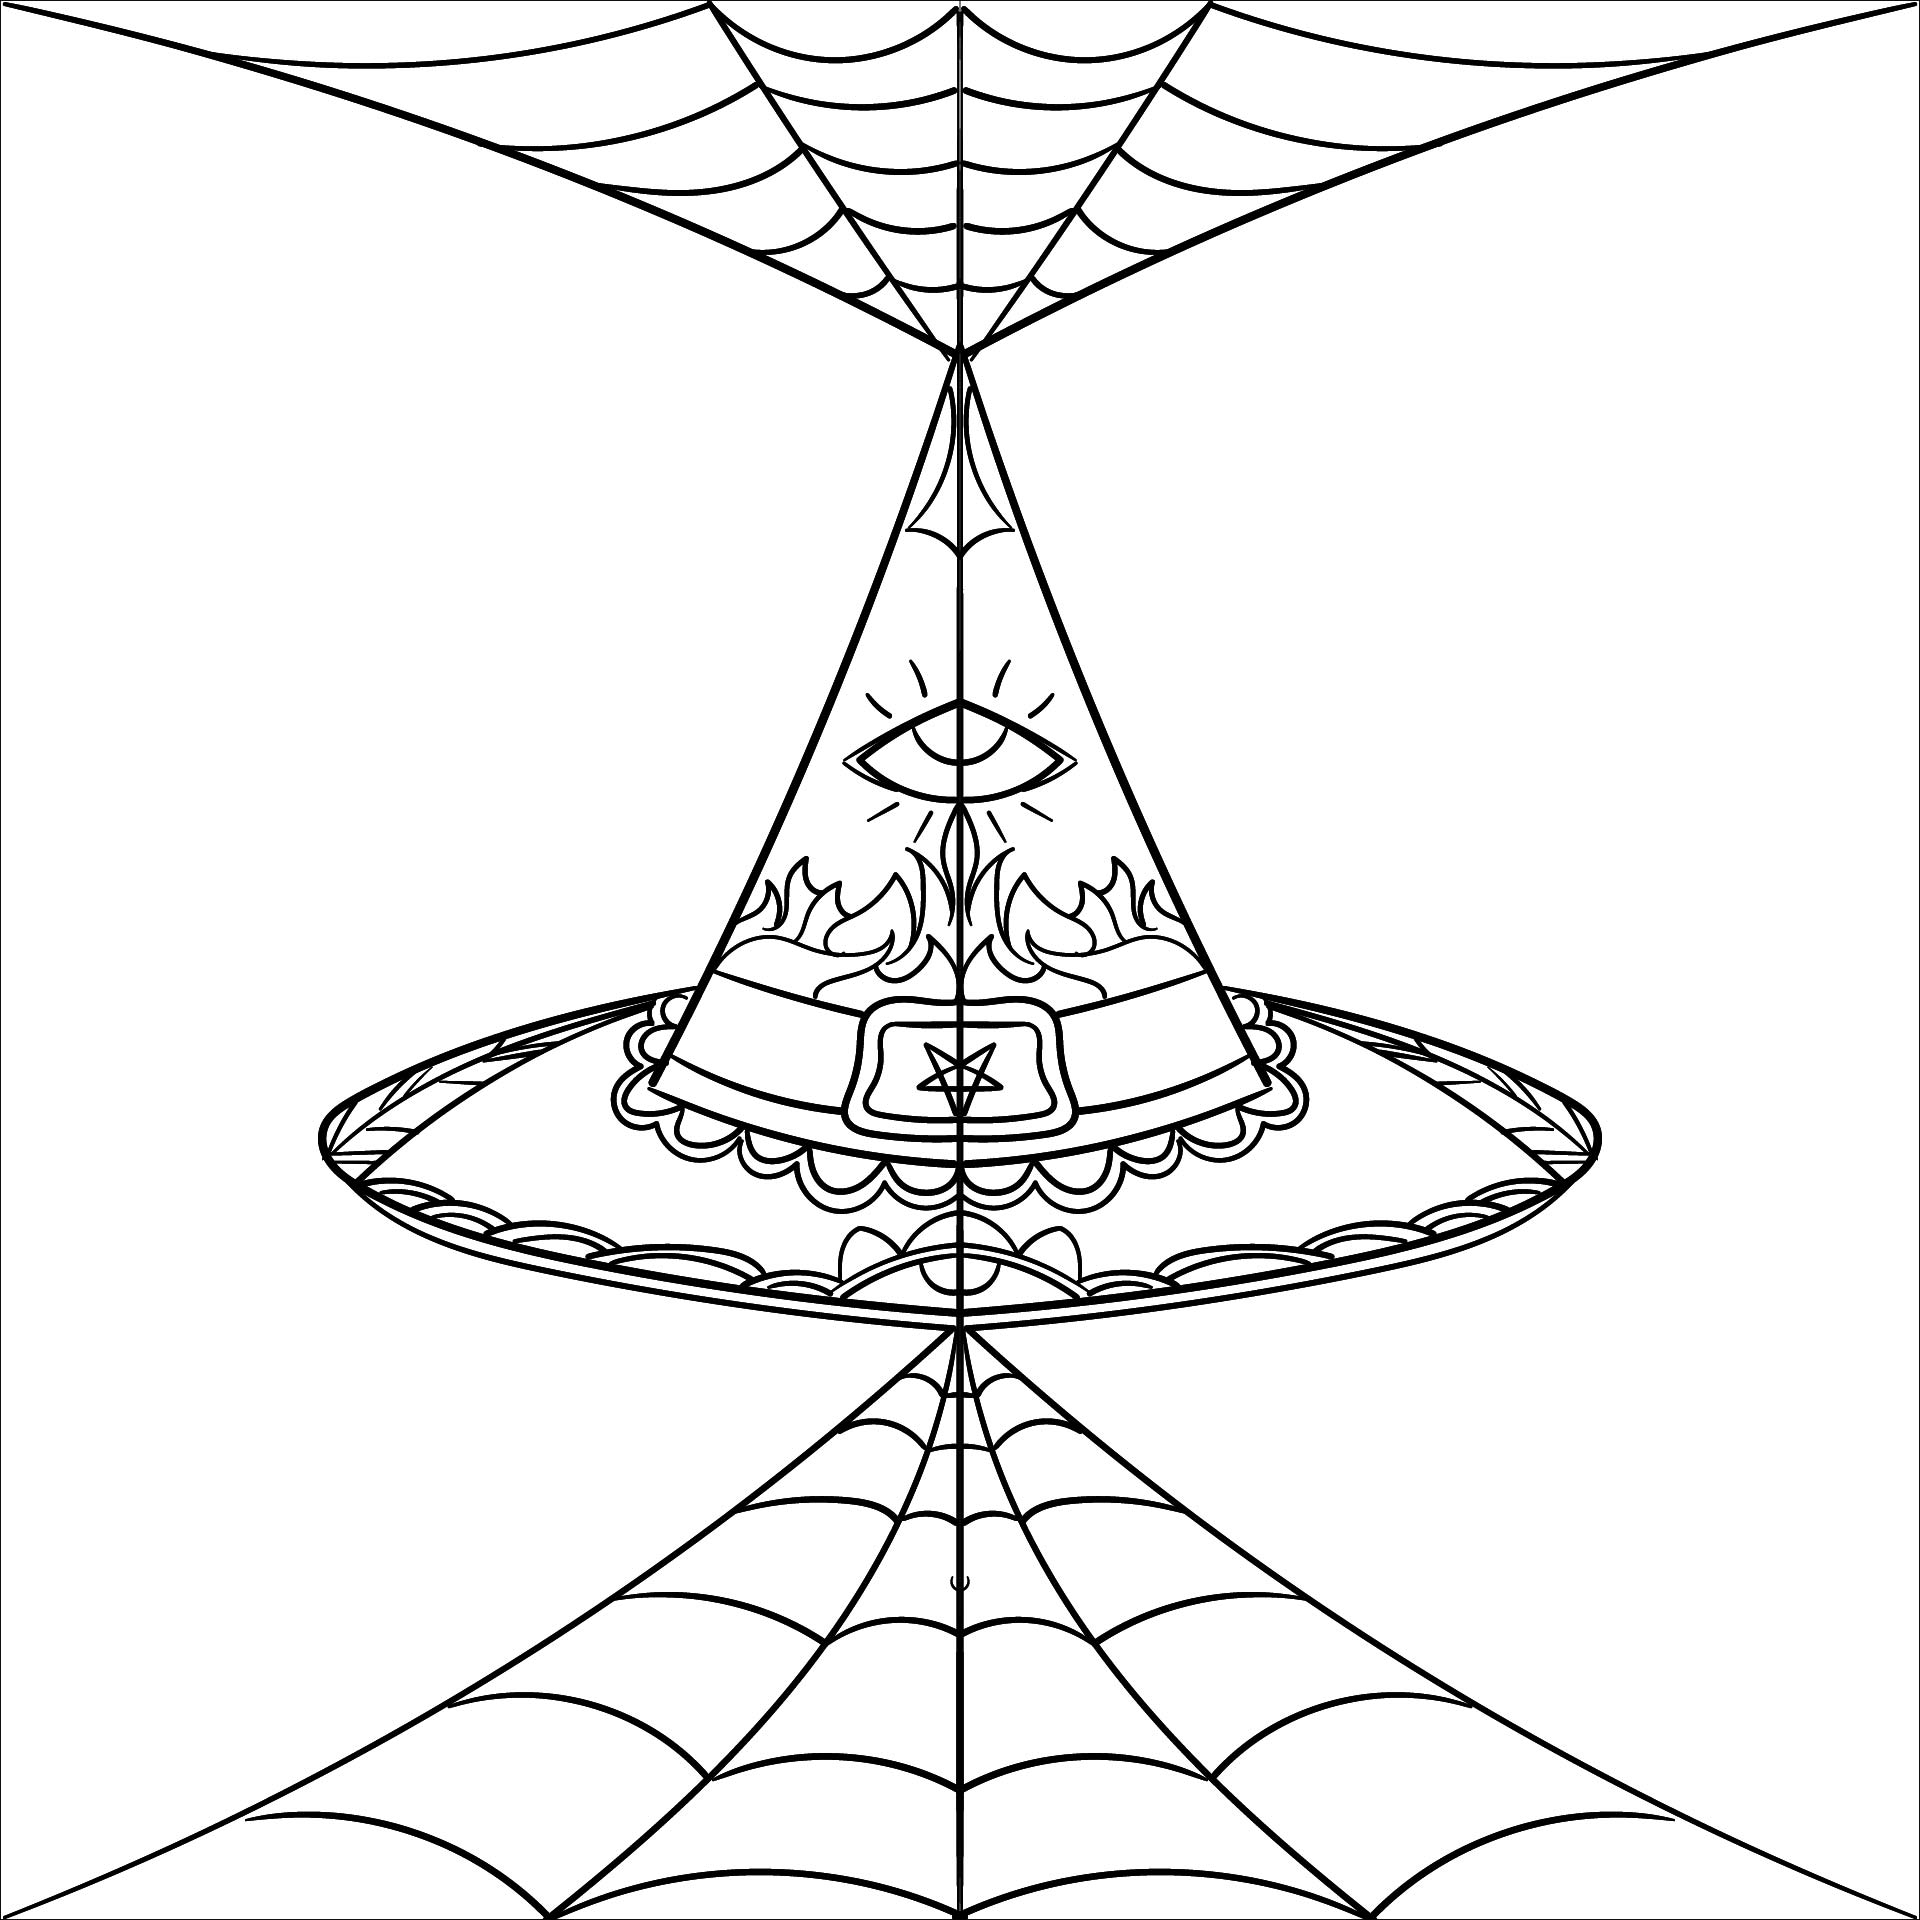 Halloween Mandala With Witch Hats And Spider Web Coloring Page